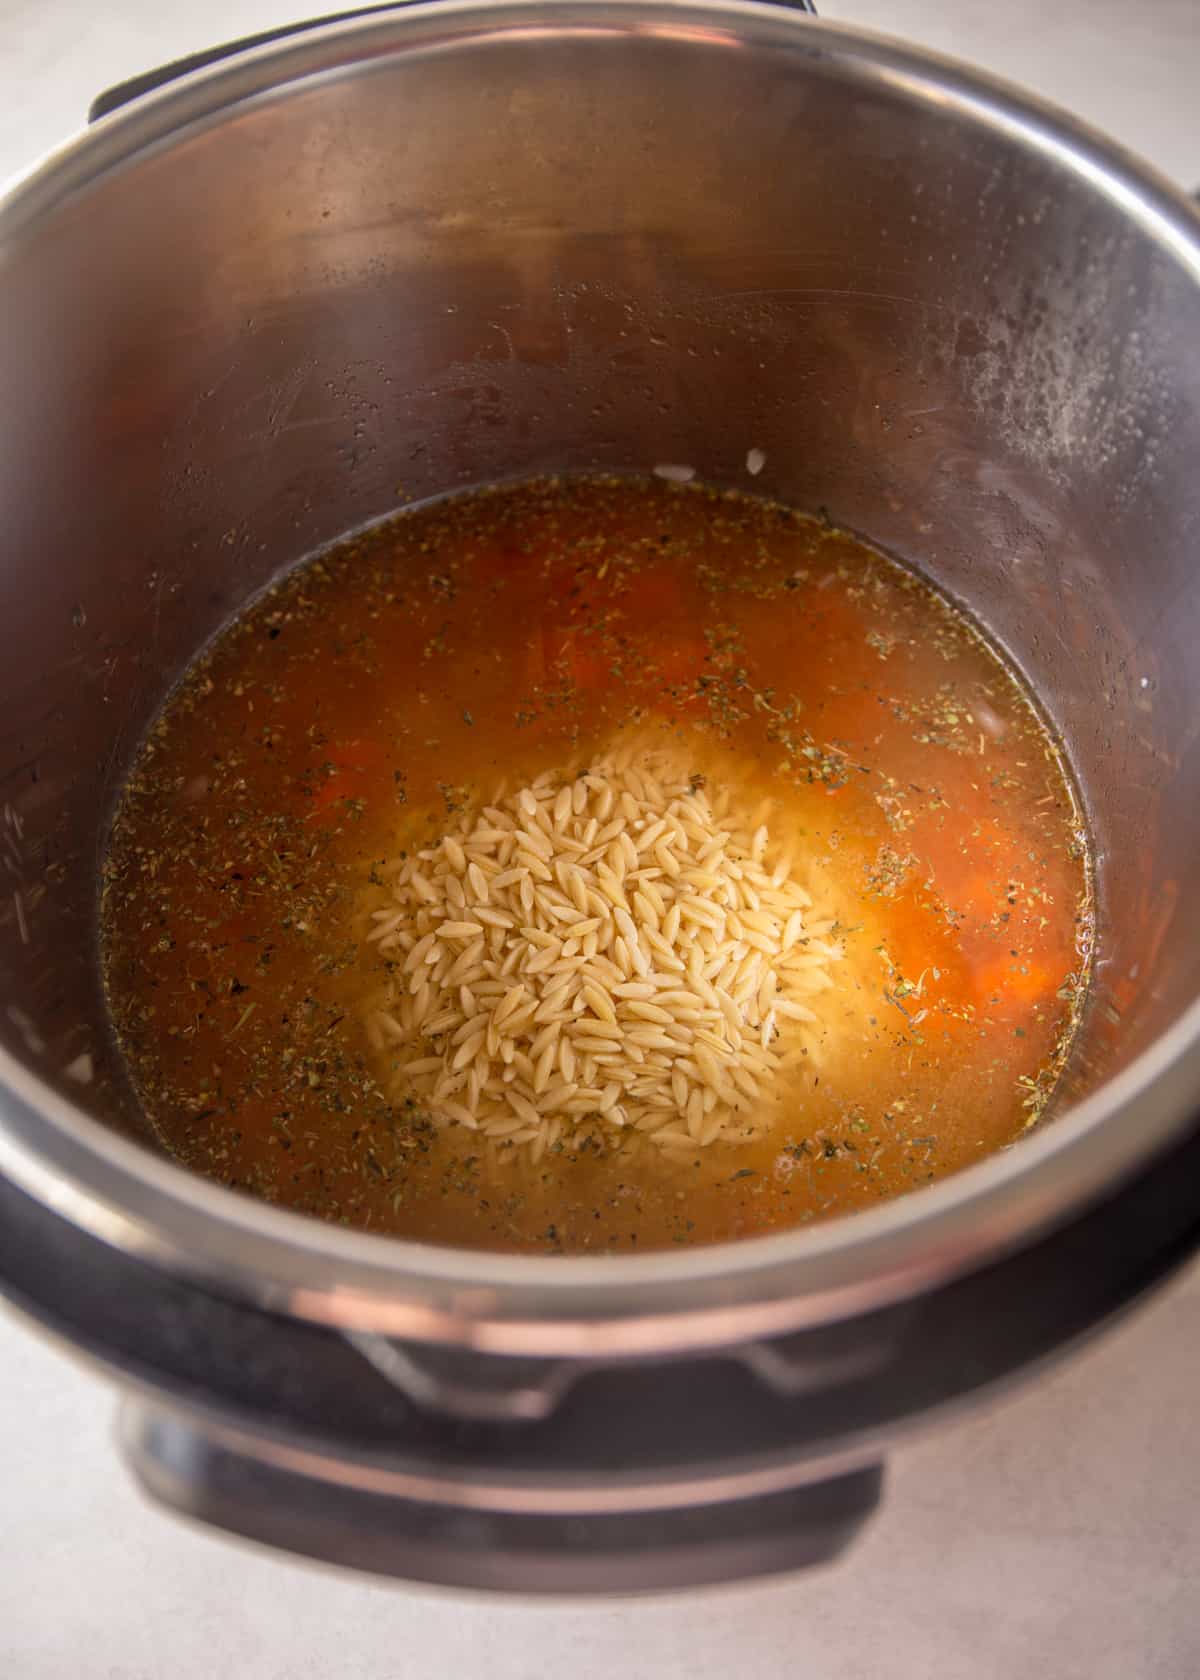 soup in the bowl of an instant pot